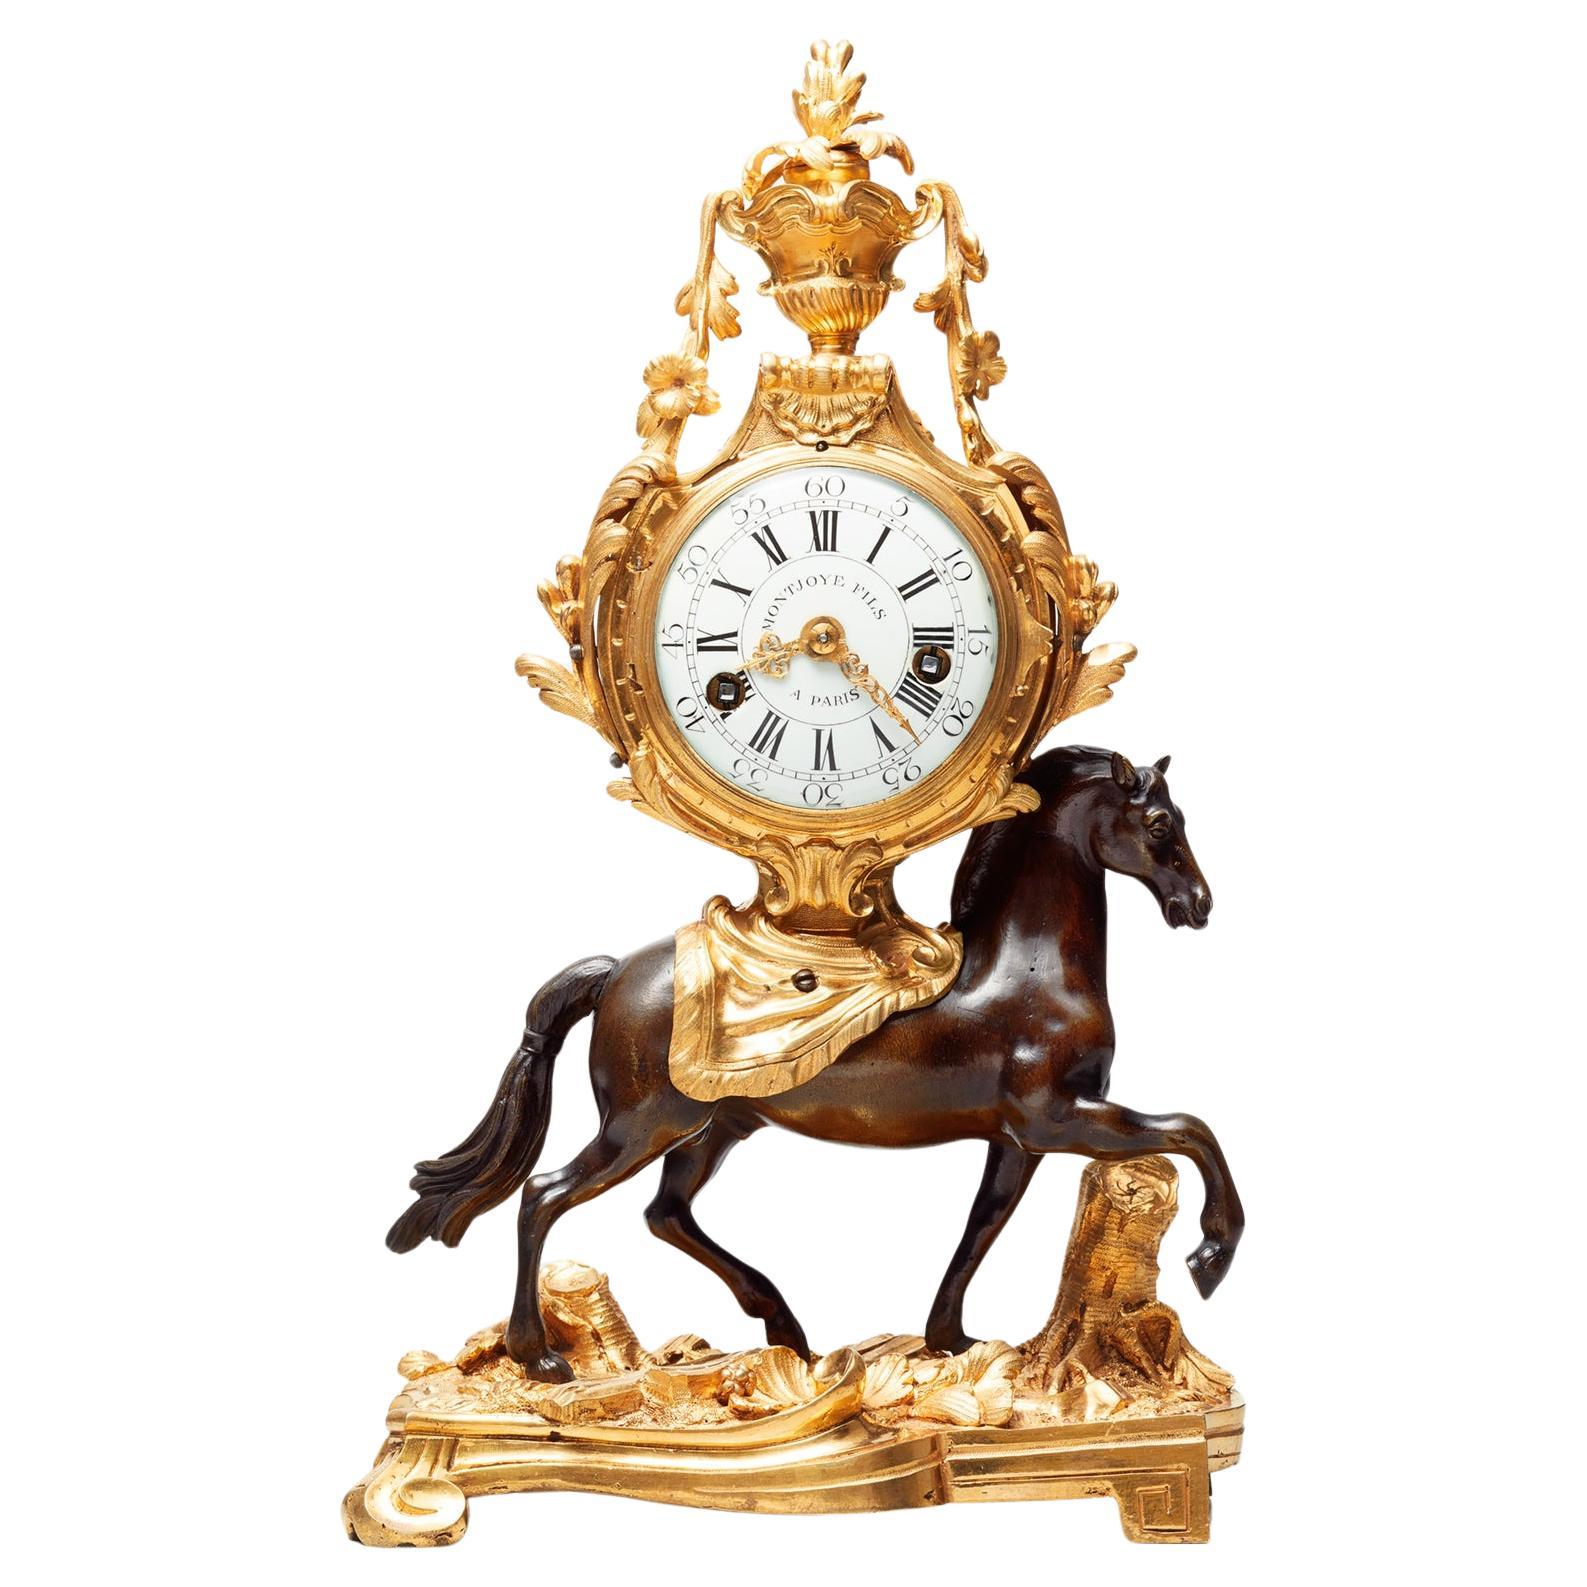 French 'Transition' mantel clock by Montjoye Fils a Paris  For Sale